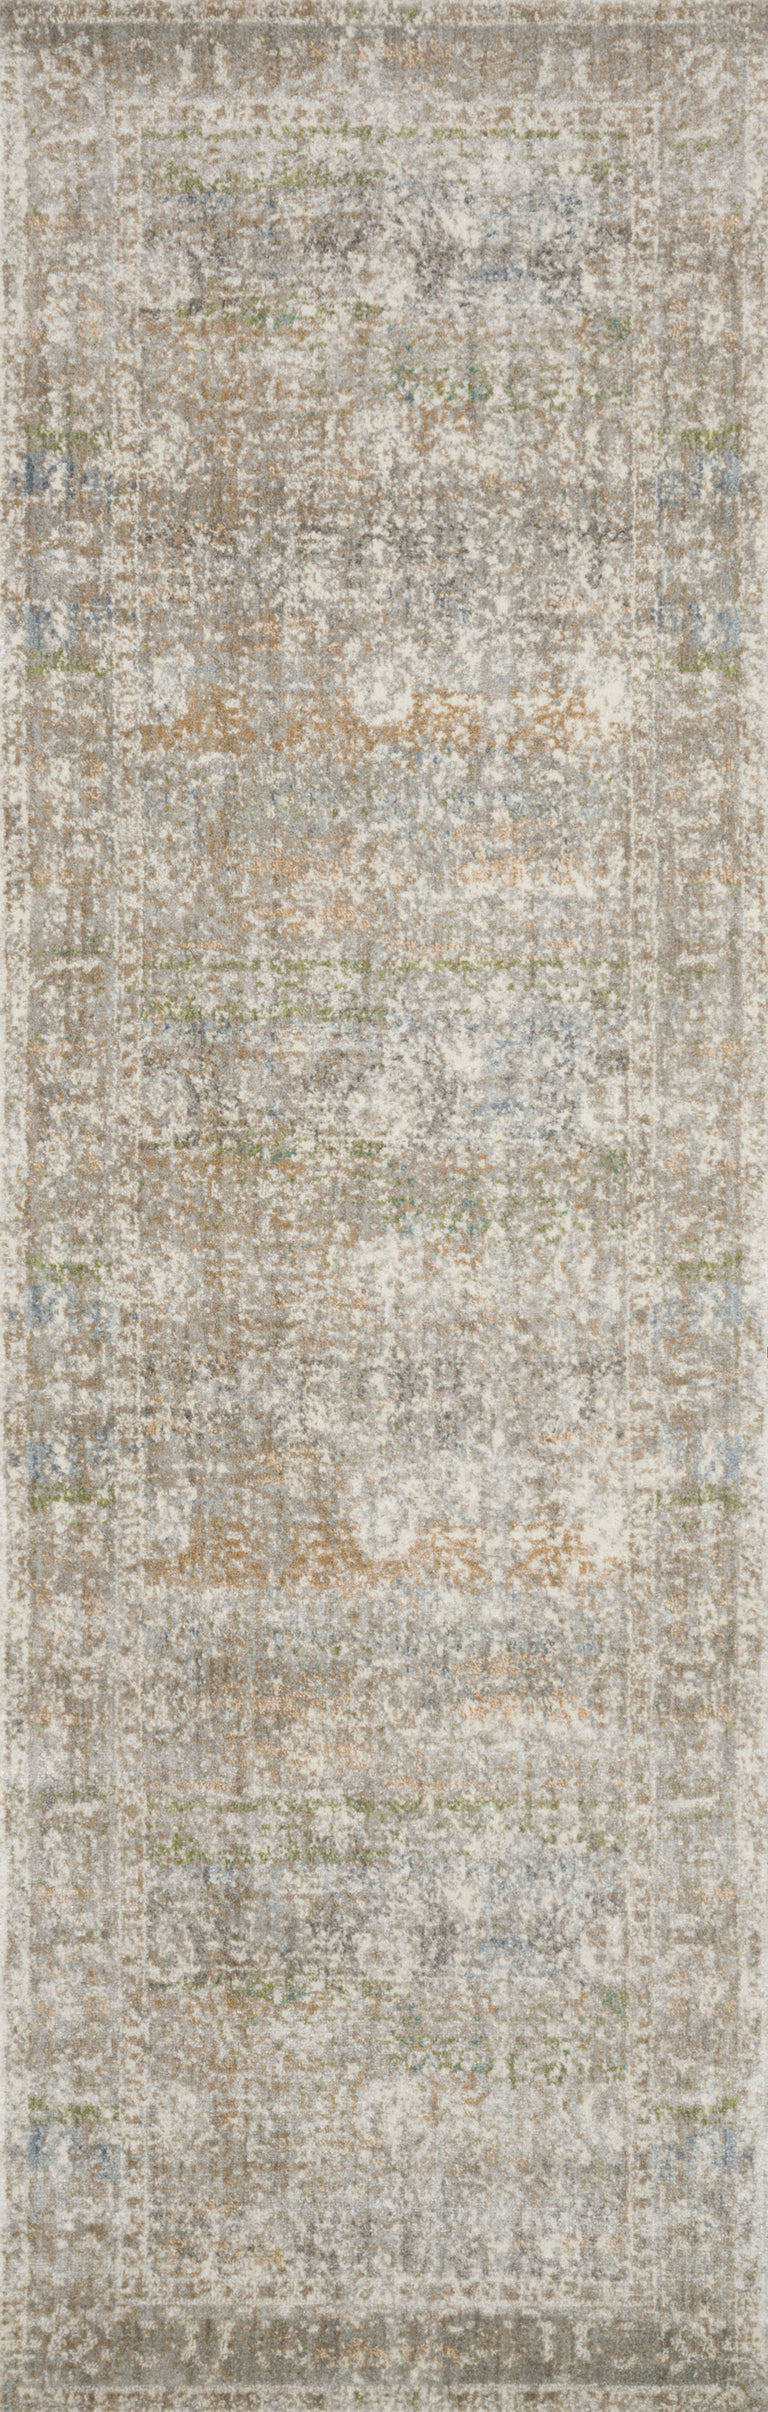 Loloi Rugs Anastasia Collection Rug in Grey, Multi - 7'10" x 7'10"